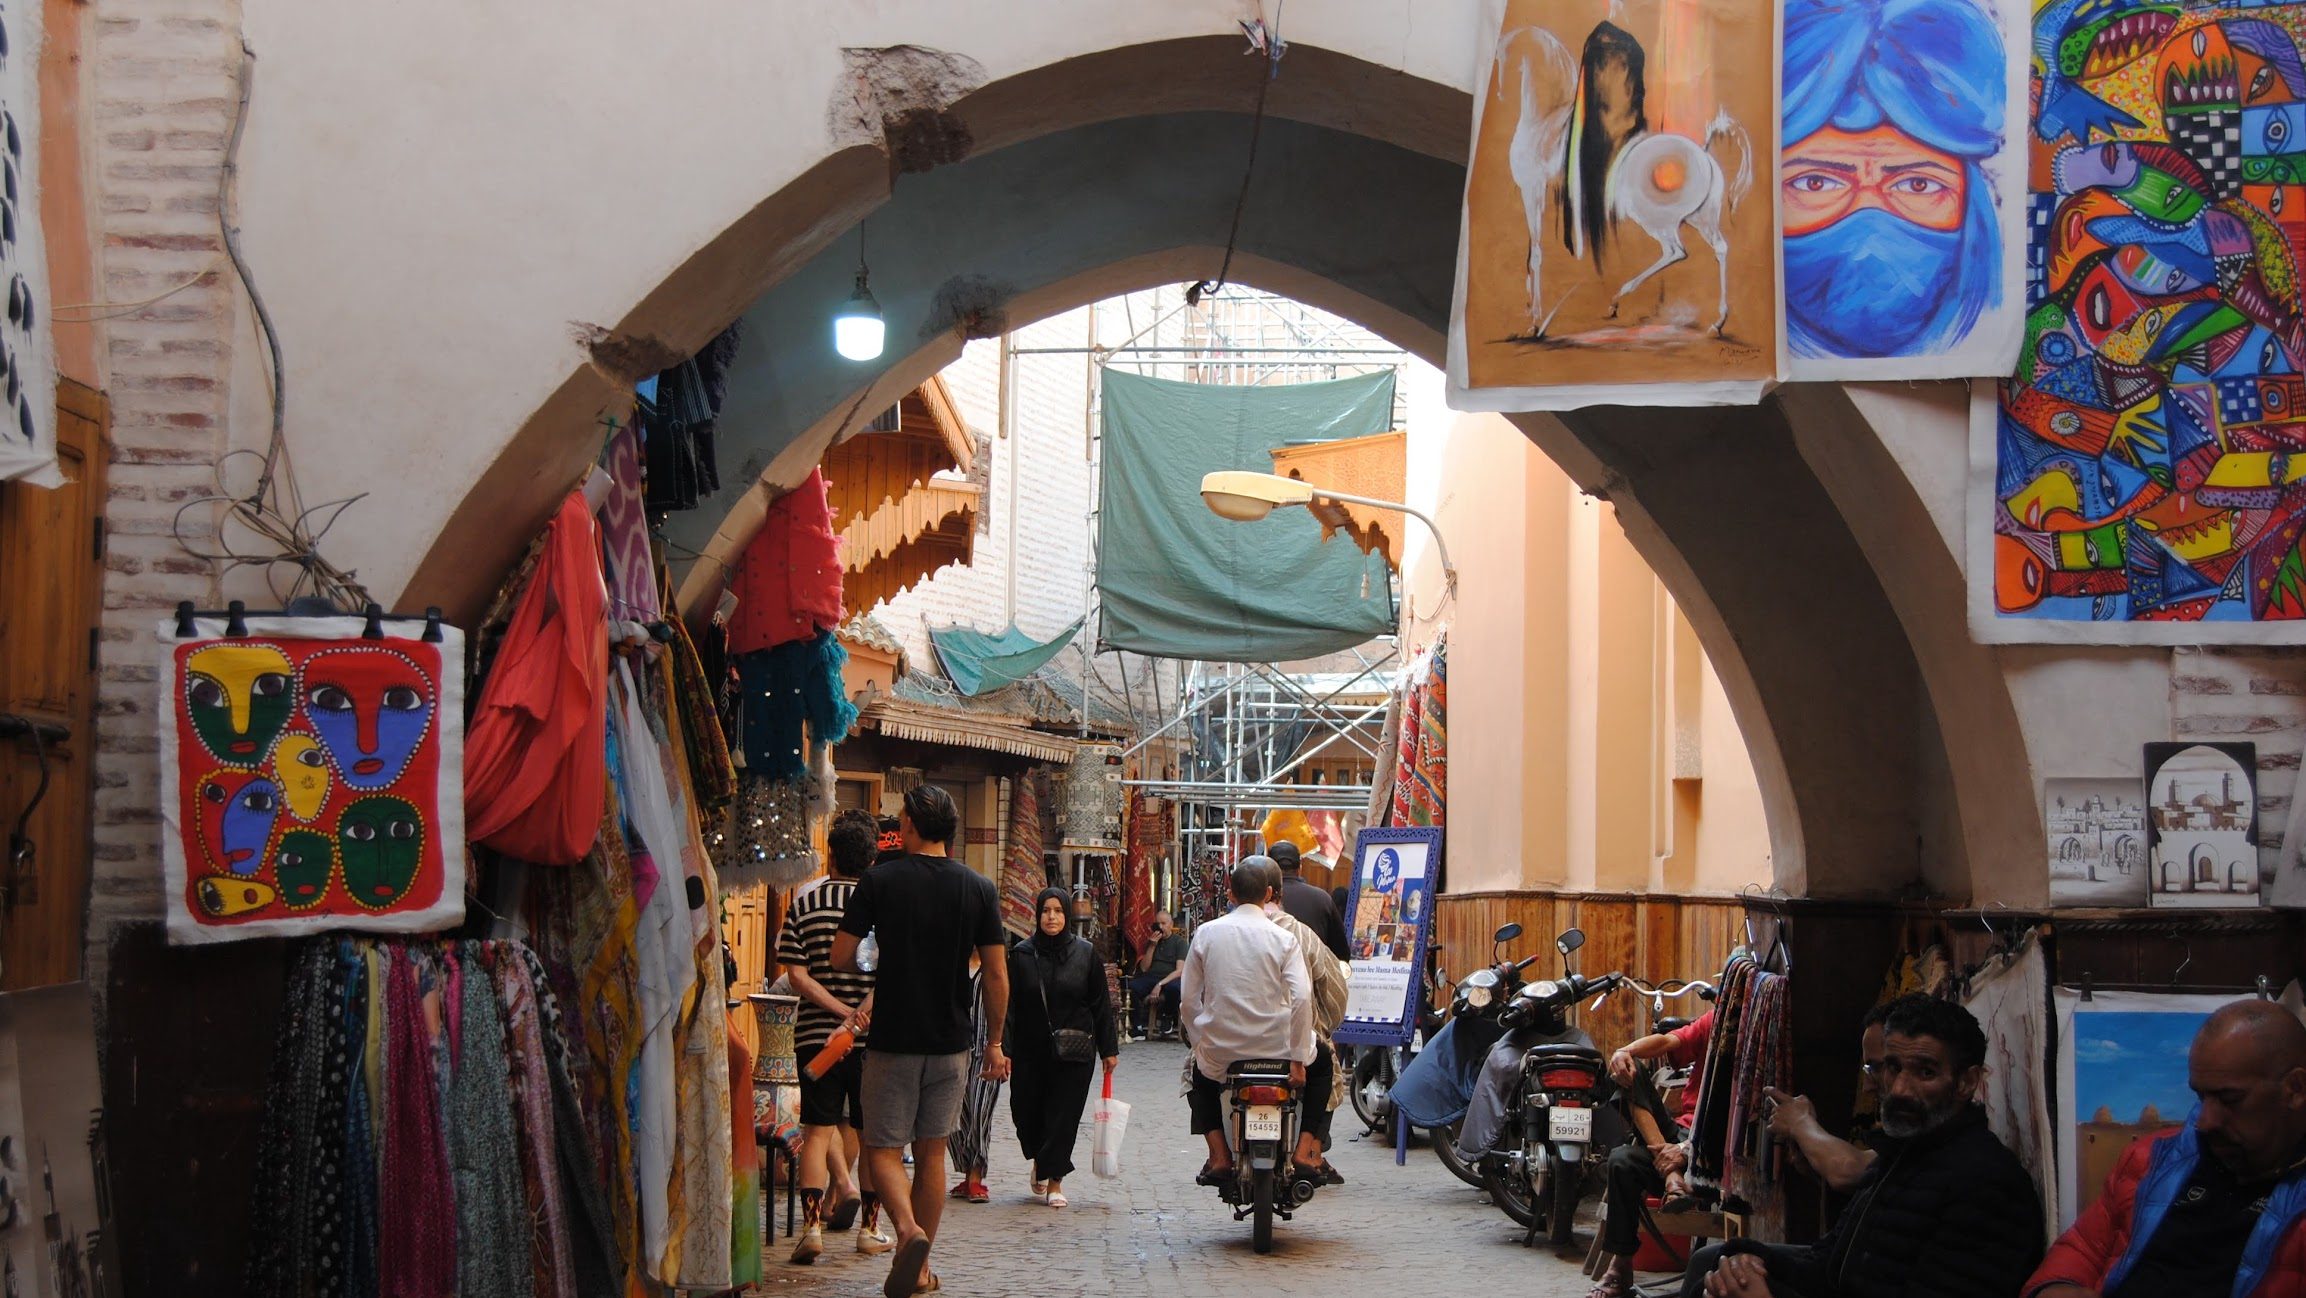 A crowded street in Marrakesh